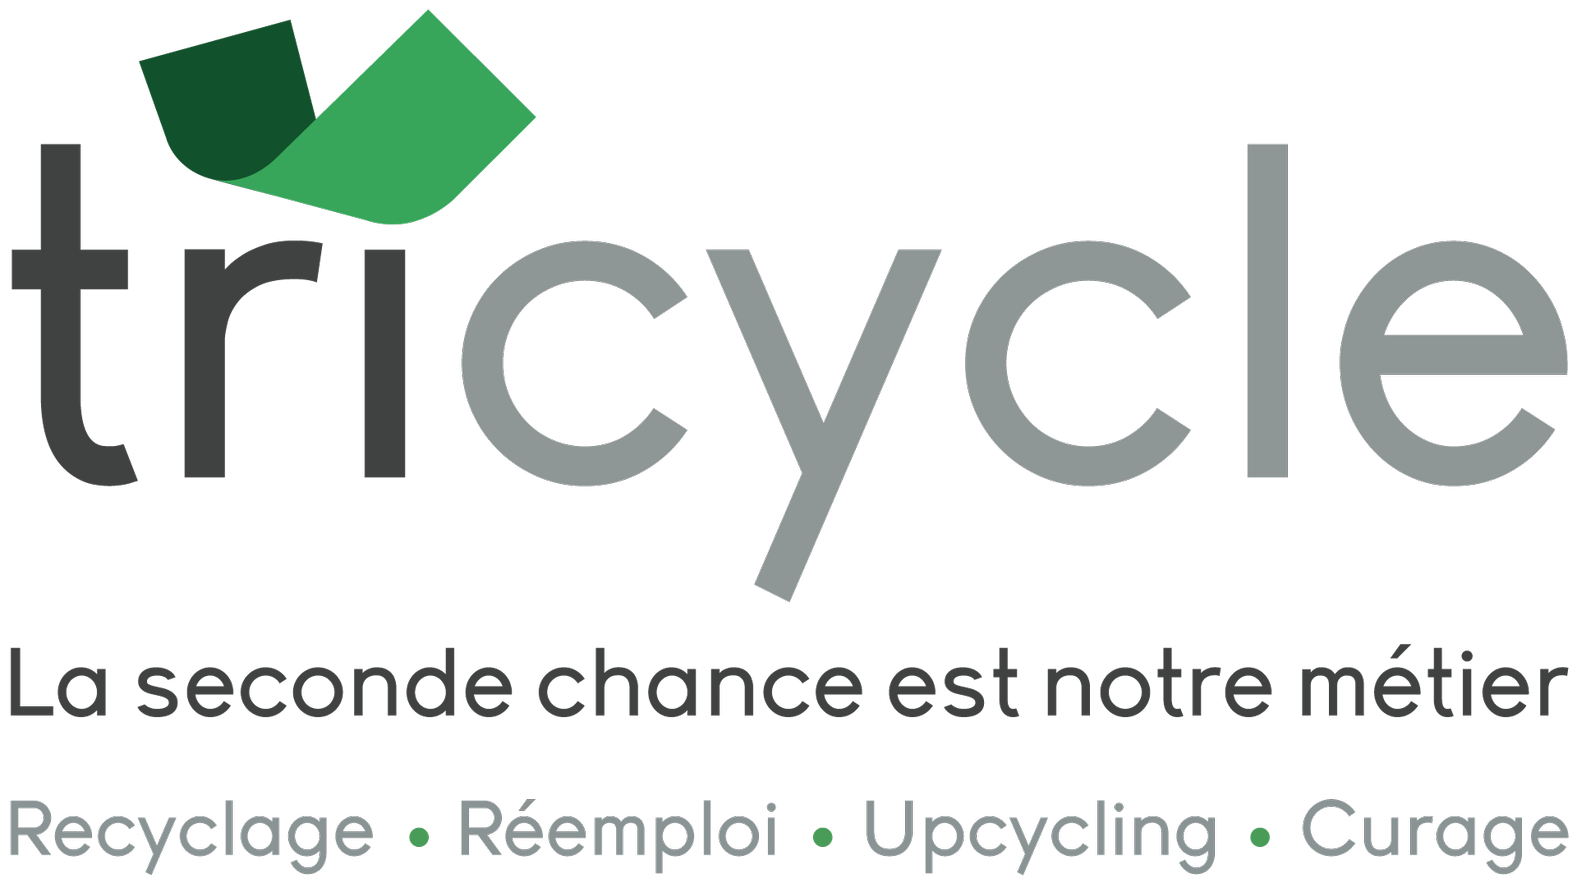 tricycle-environnement-logo-tricycle-groupe